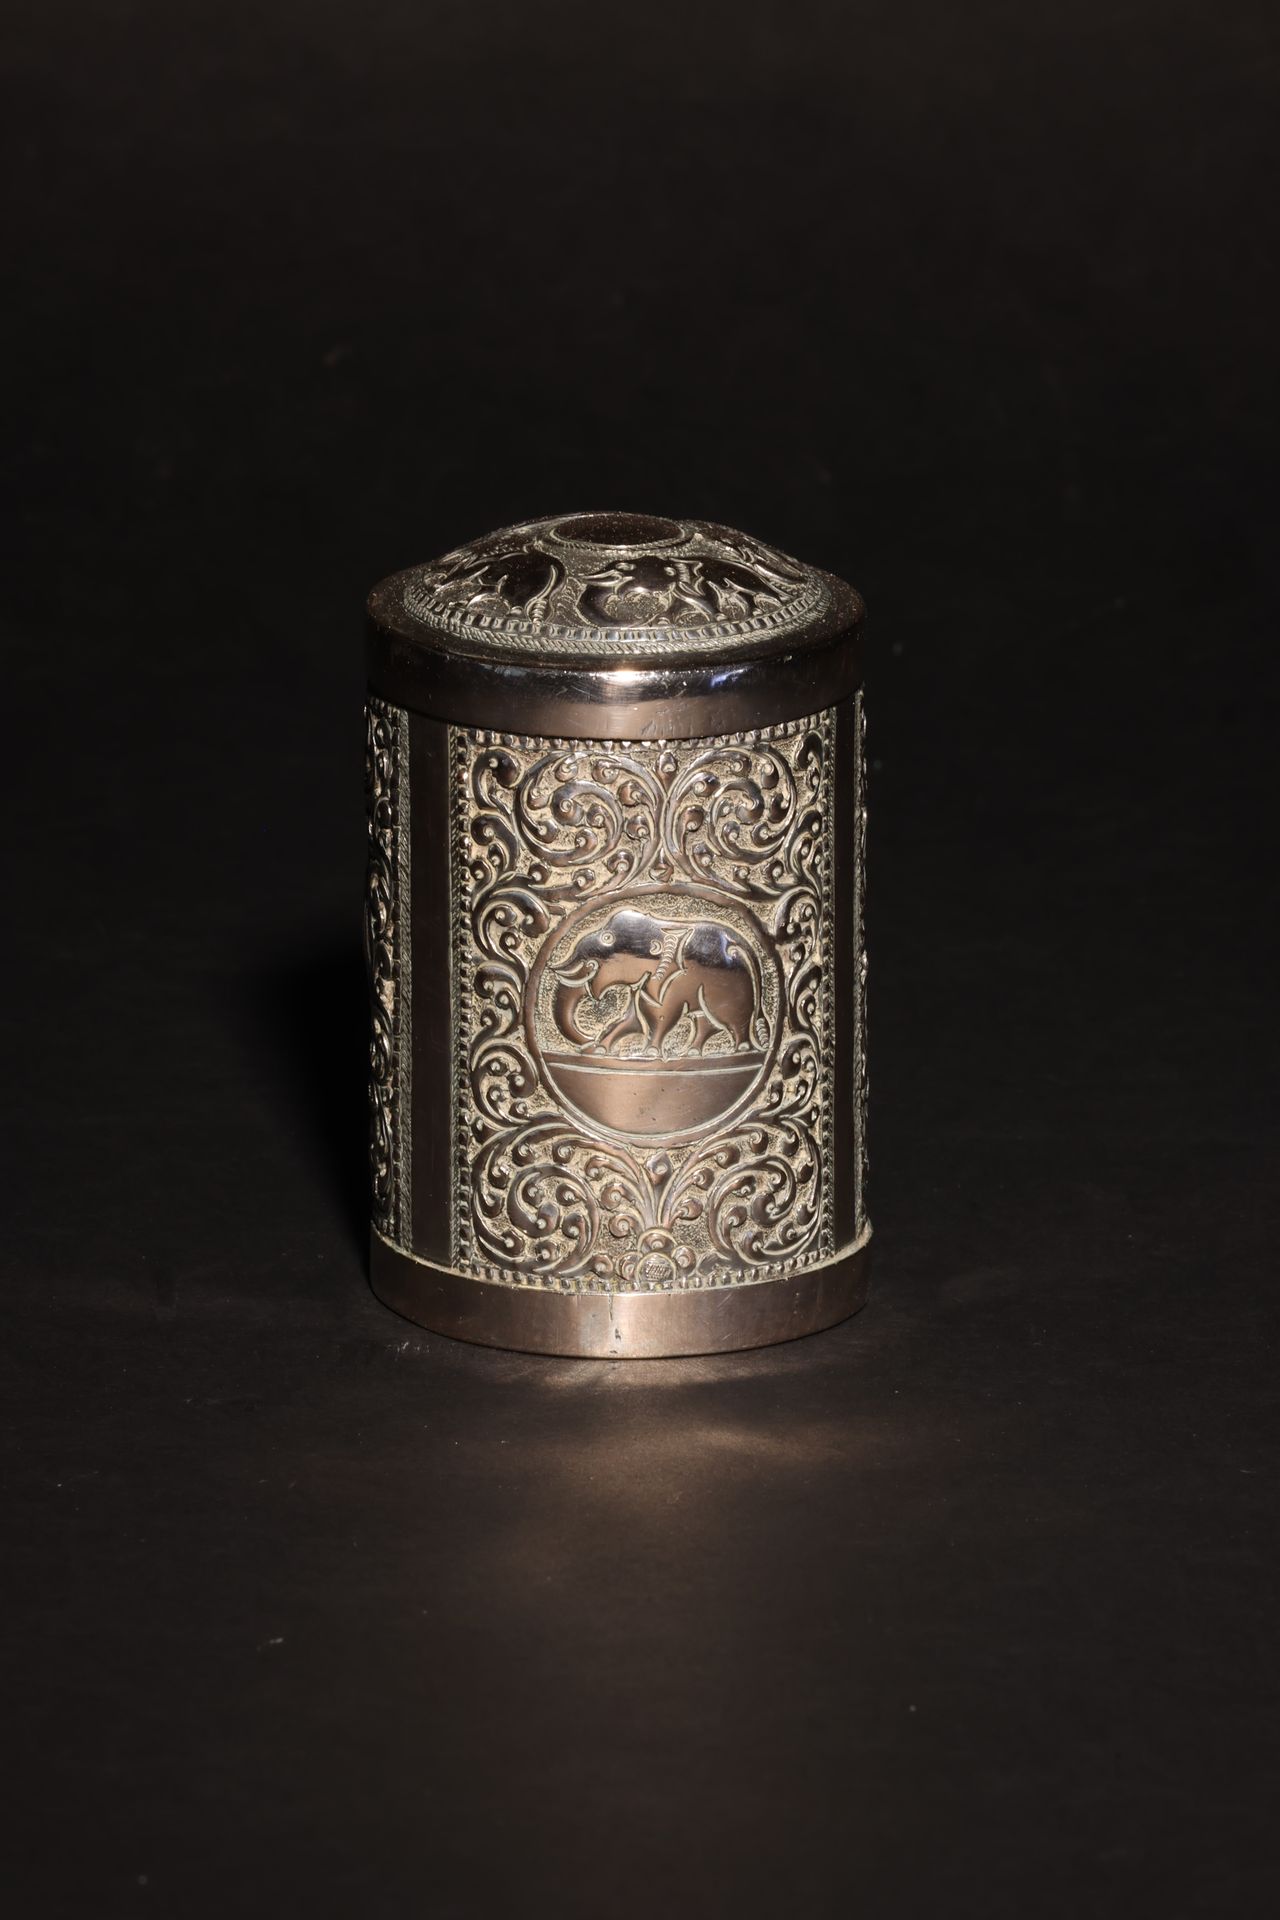 An Antique South Asian Cylindrical Silver Casket and Domed Lid Antiguo cofre cil&hellip;